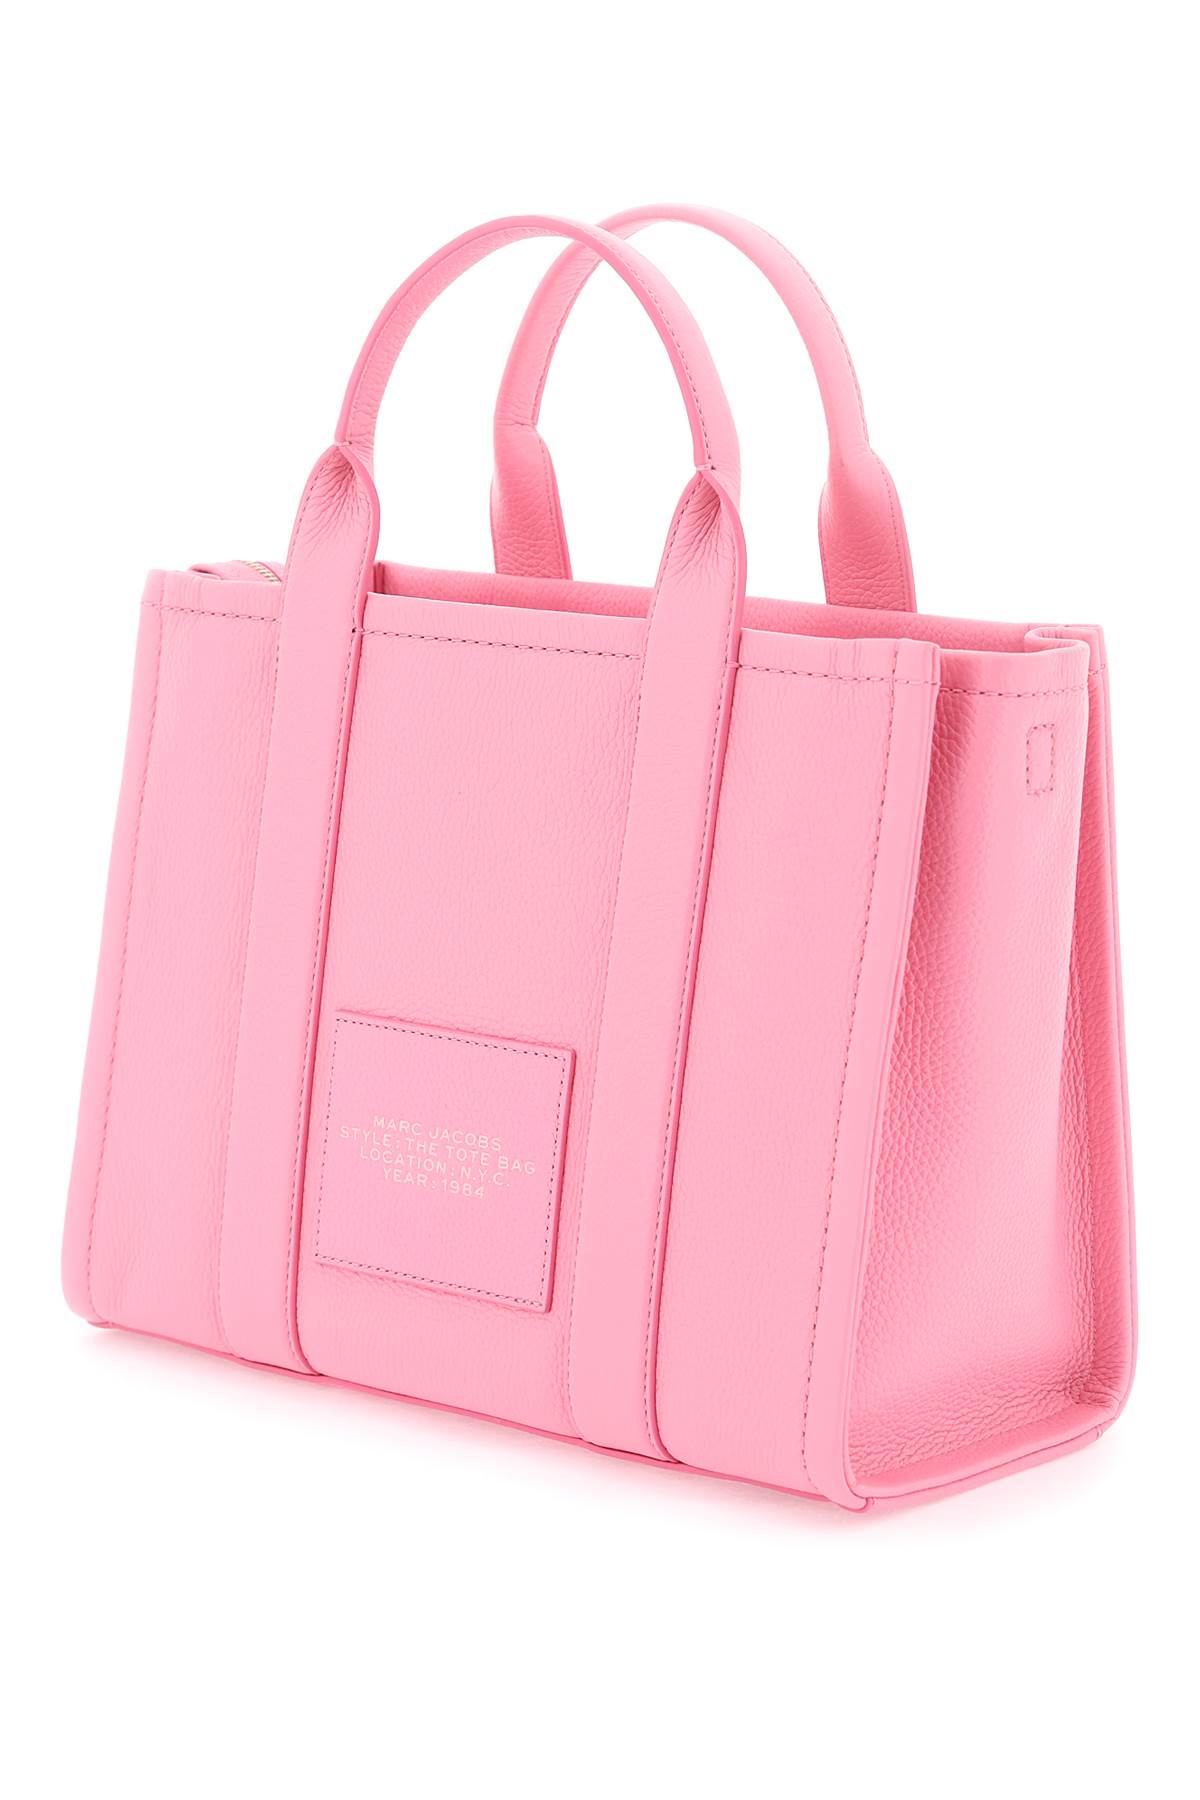 Marc Jacobs Marc jacobs the leather small tote bag